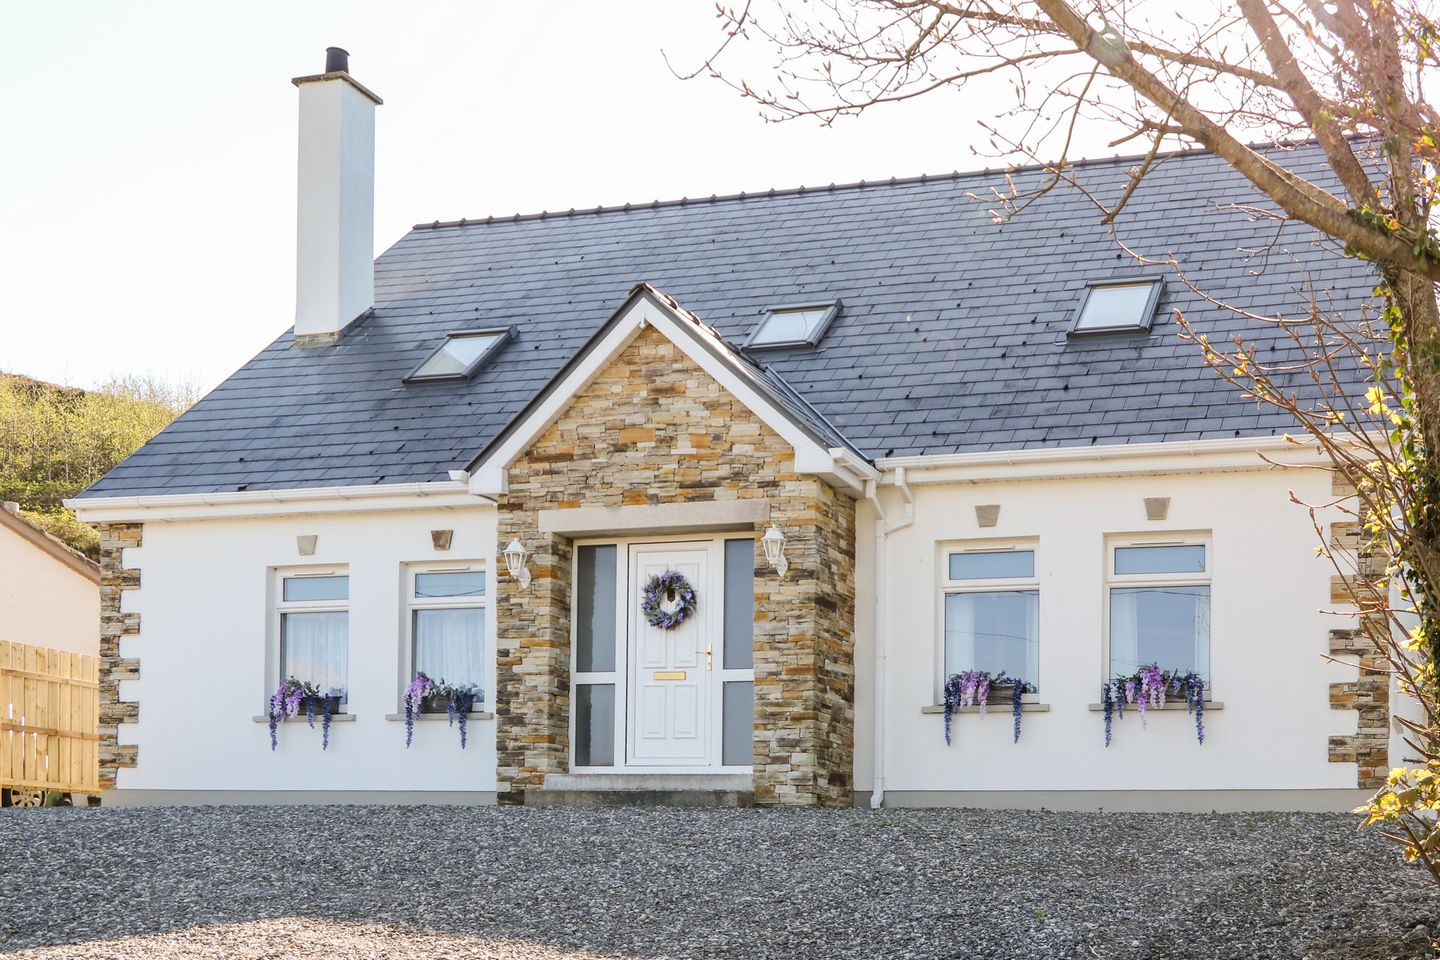 Ref. 1102005 Wisteria Cottage, Glen Road, Annagry, Co. Donegal